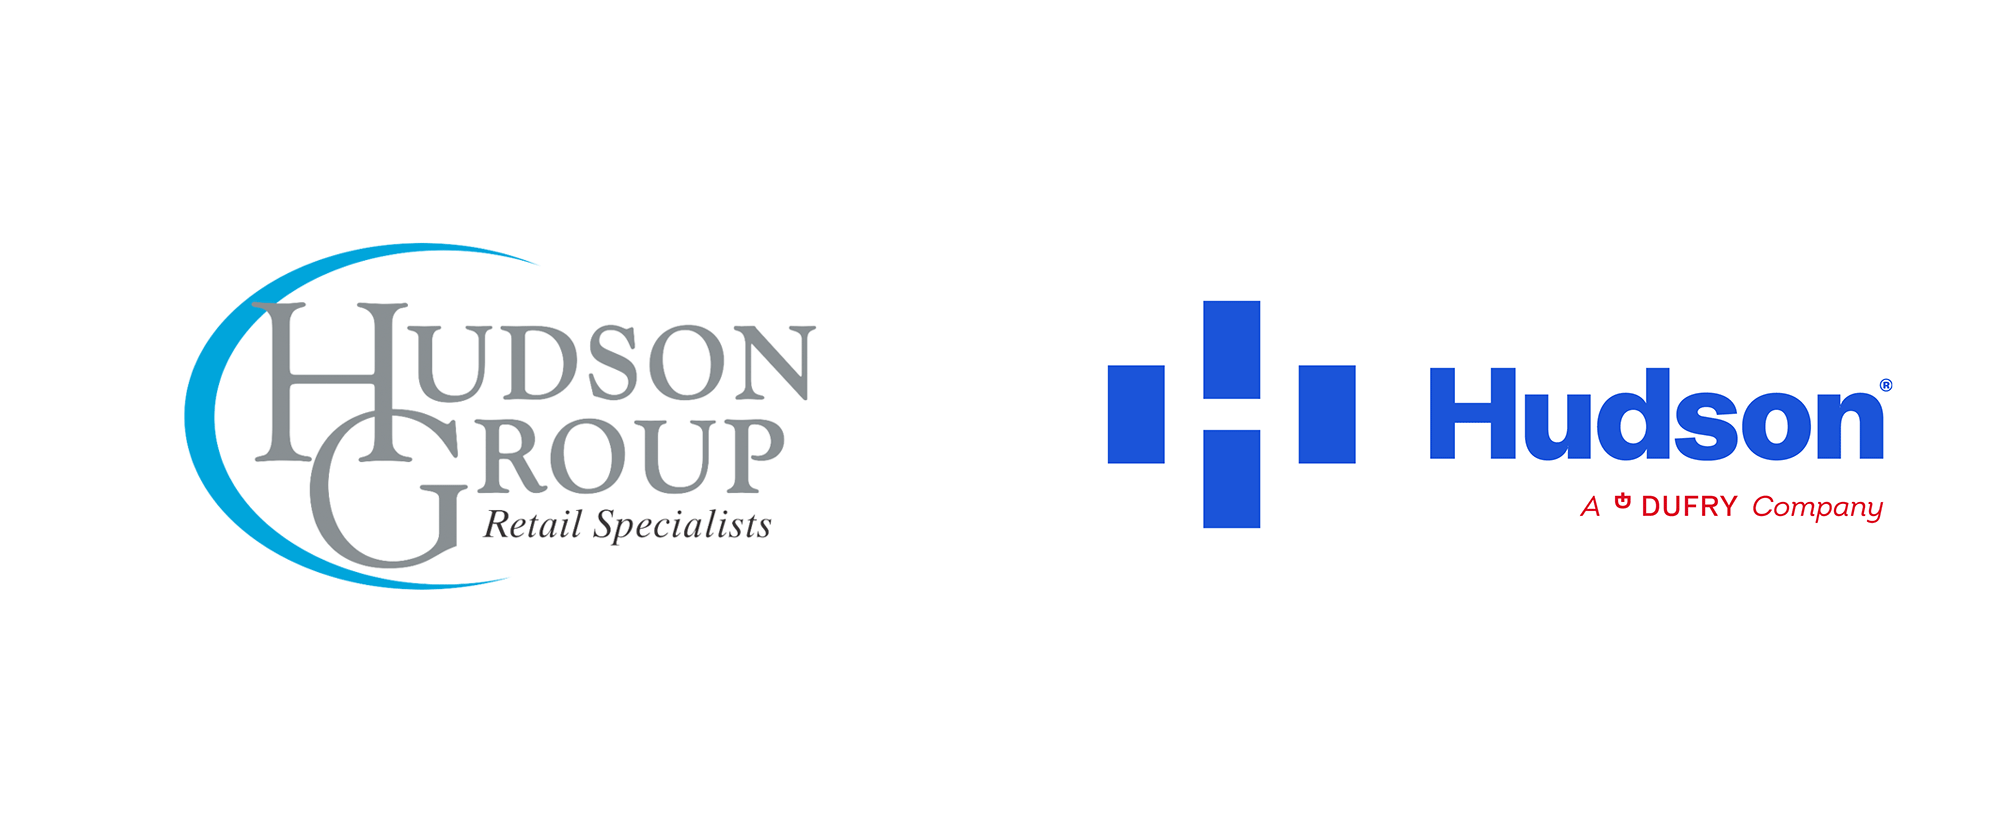 New Logo and Identity for Hudson by Siegel+Gale